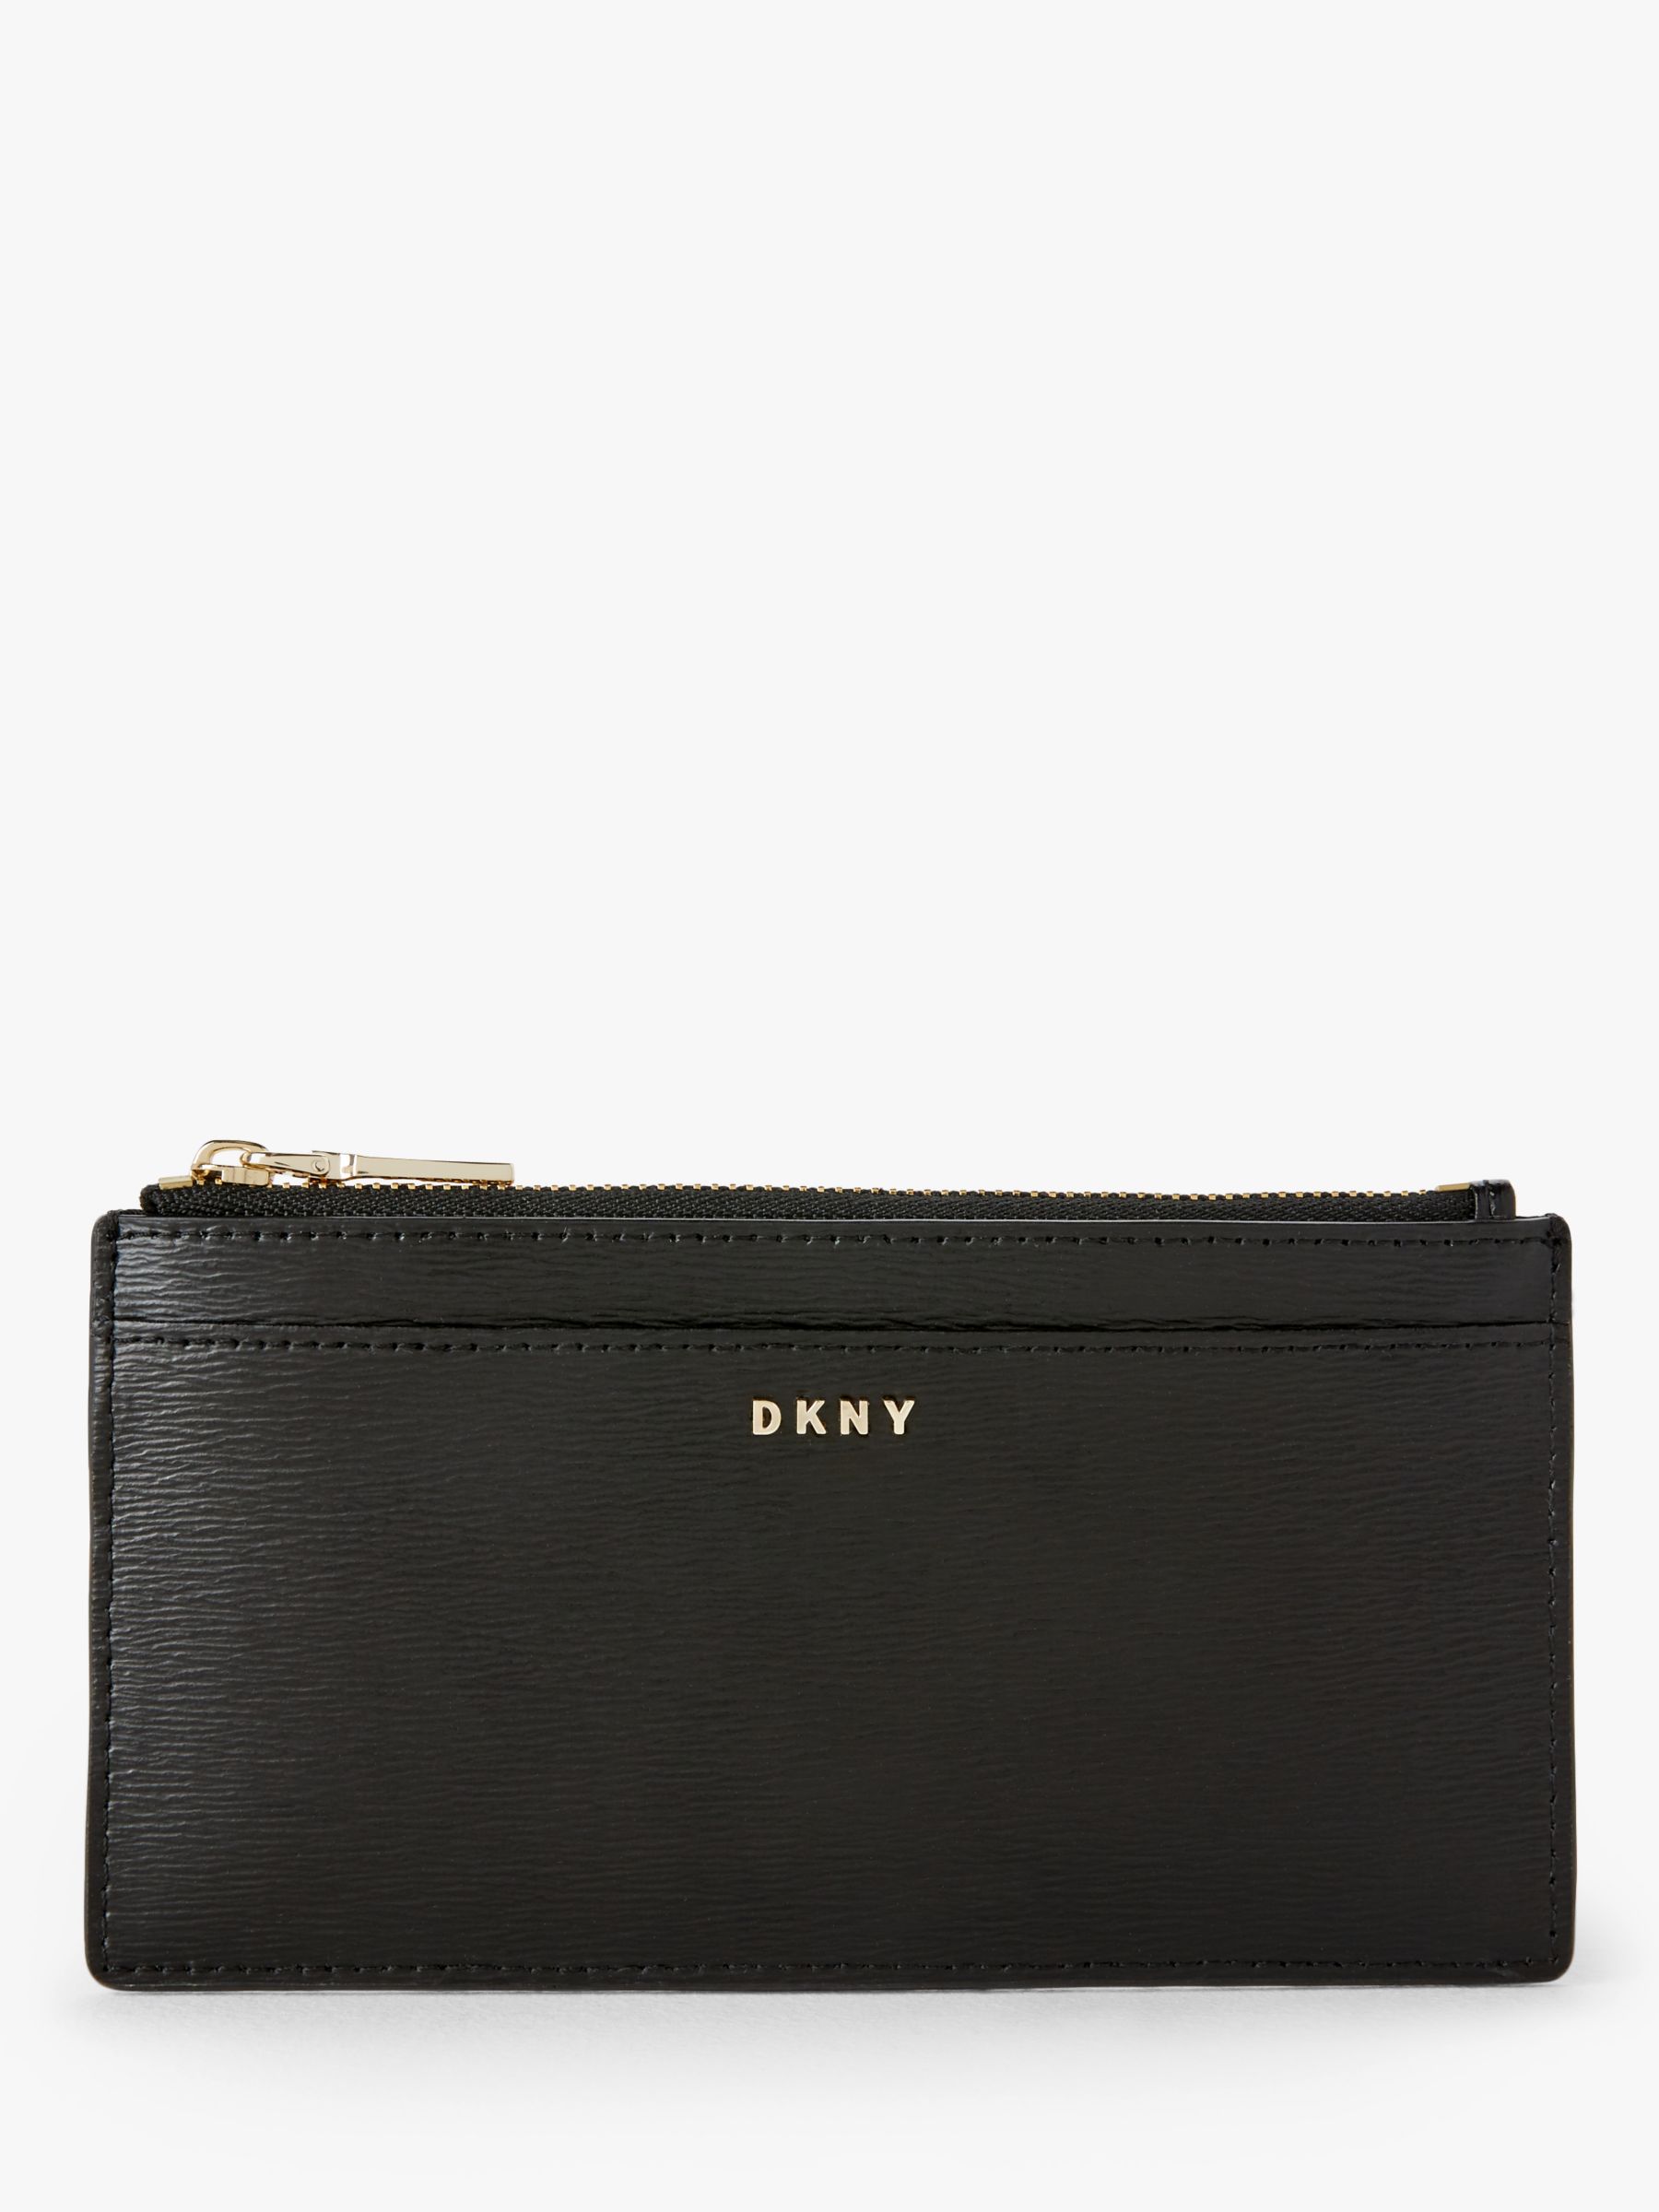 DKNY Bryant Sutton Coin Purse at John Lewis & Partners